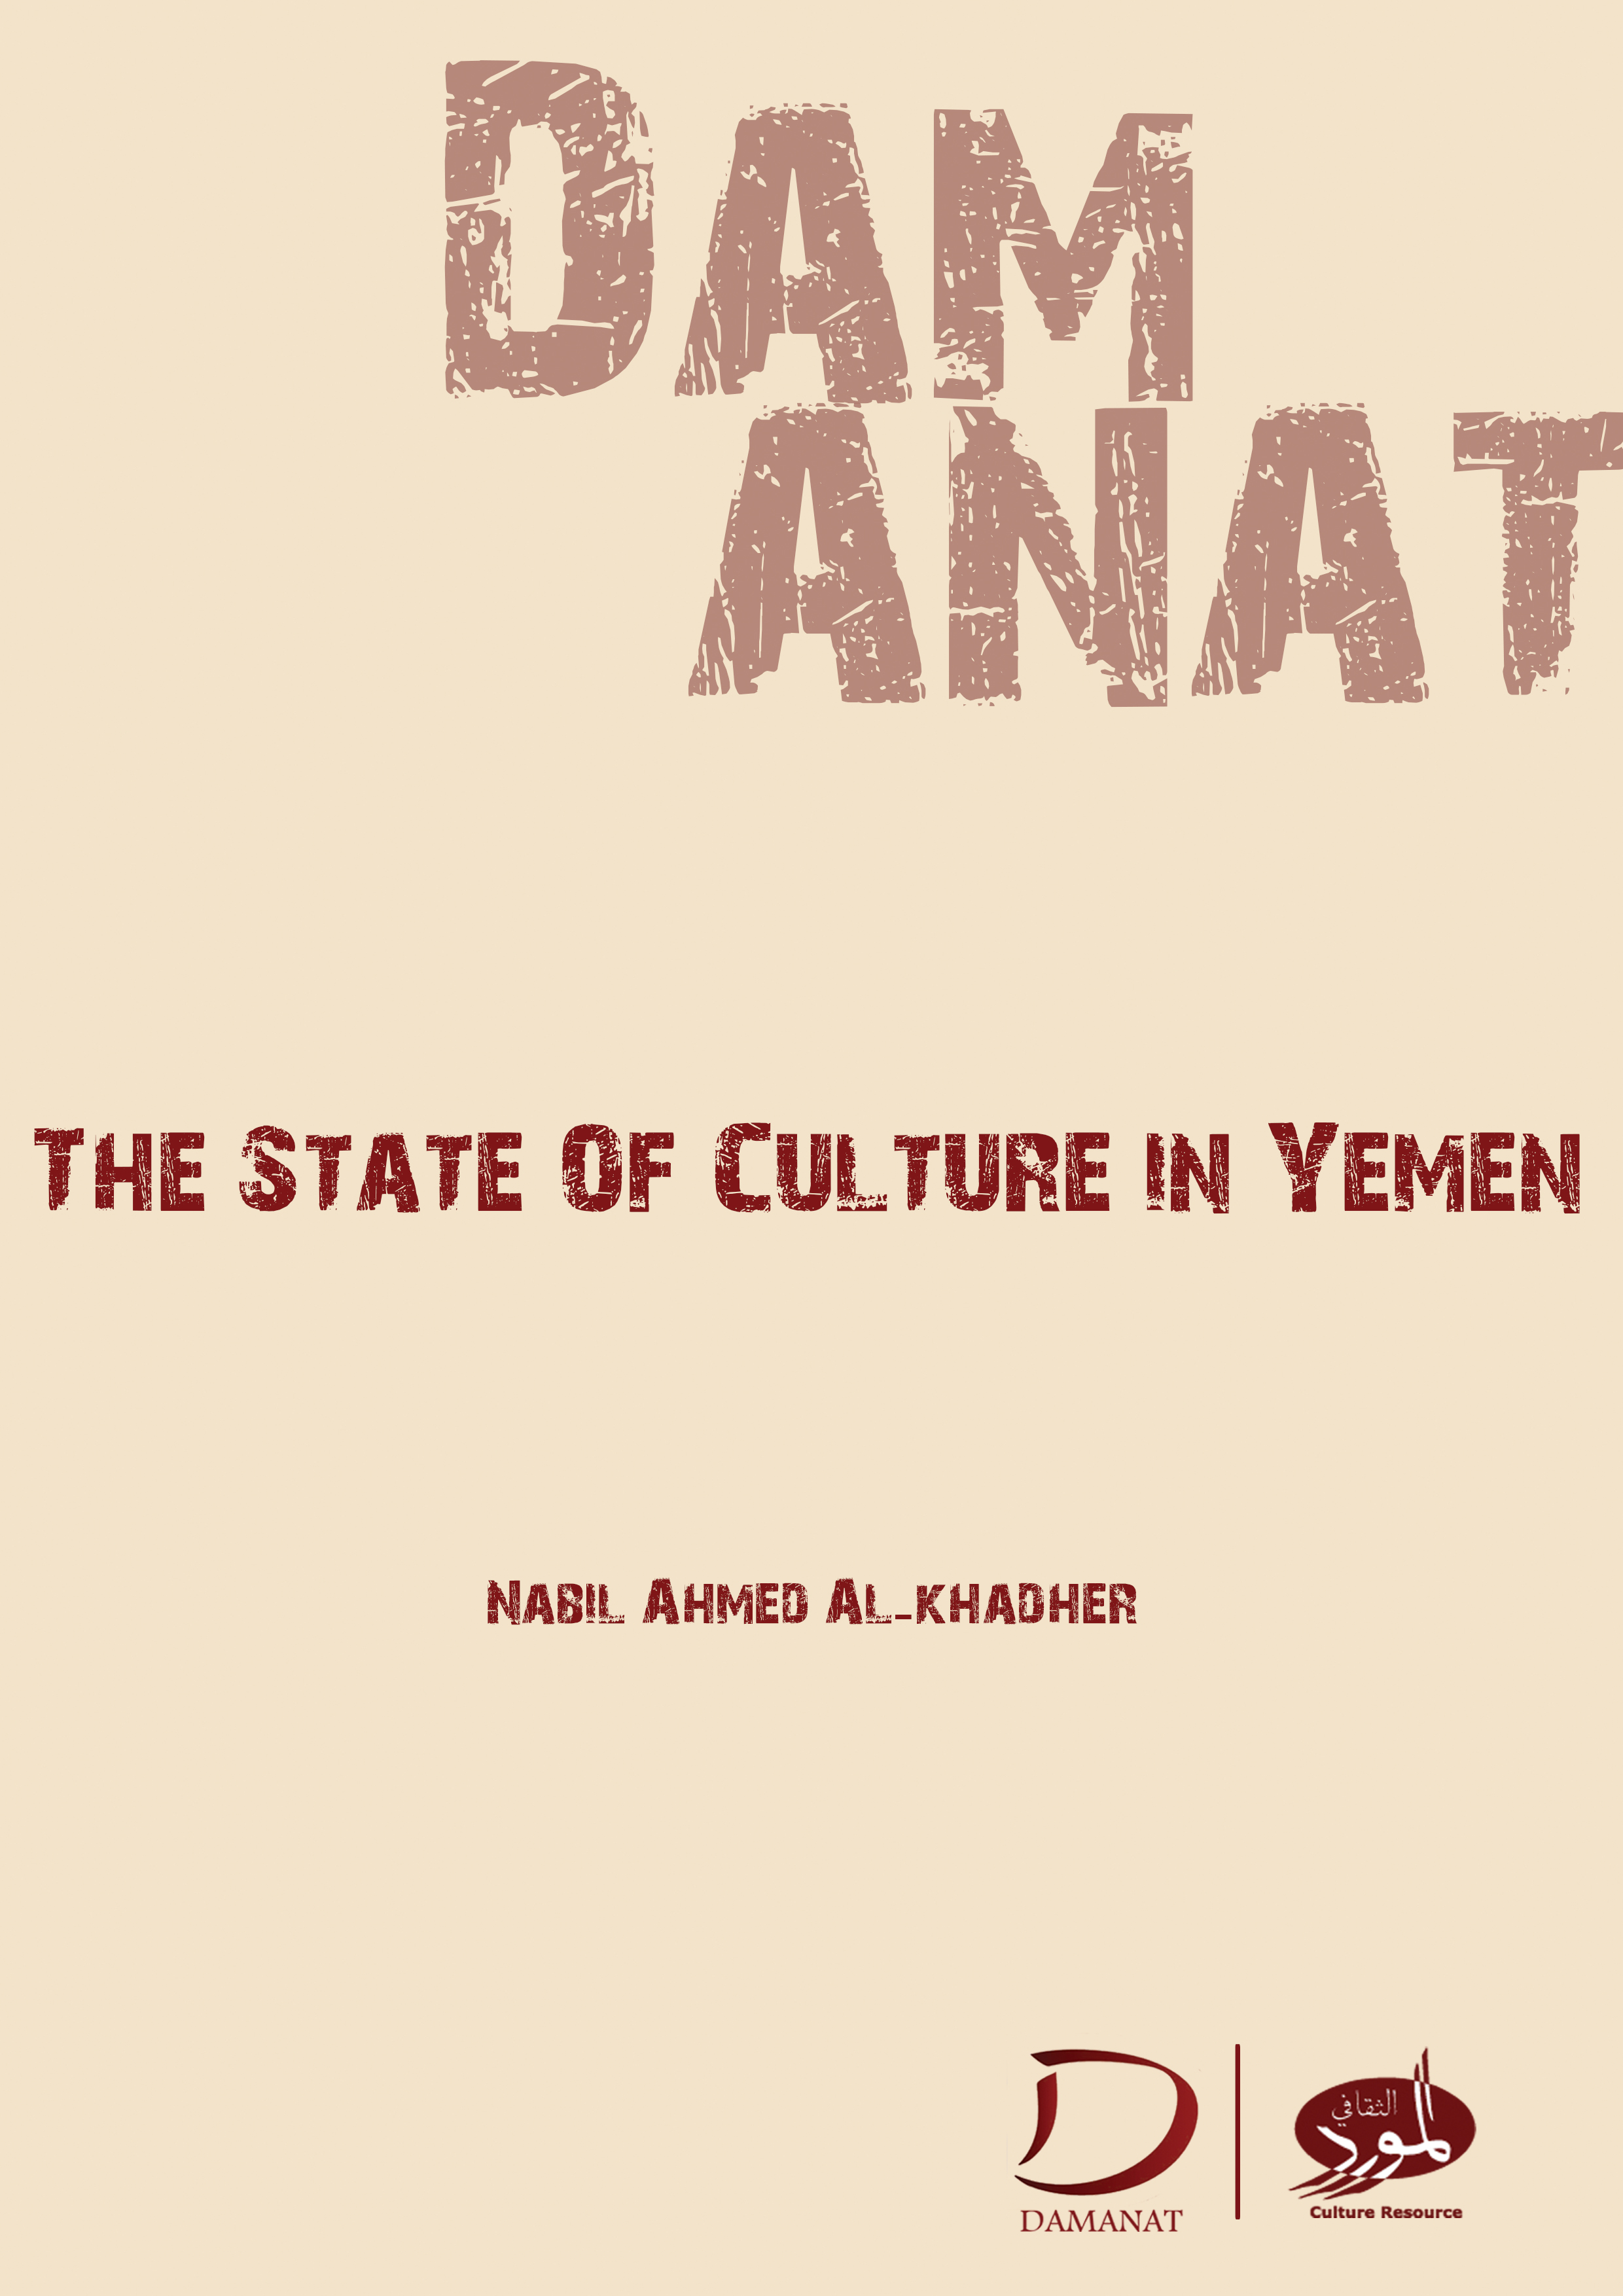 The state of culture in Yemen